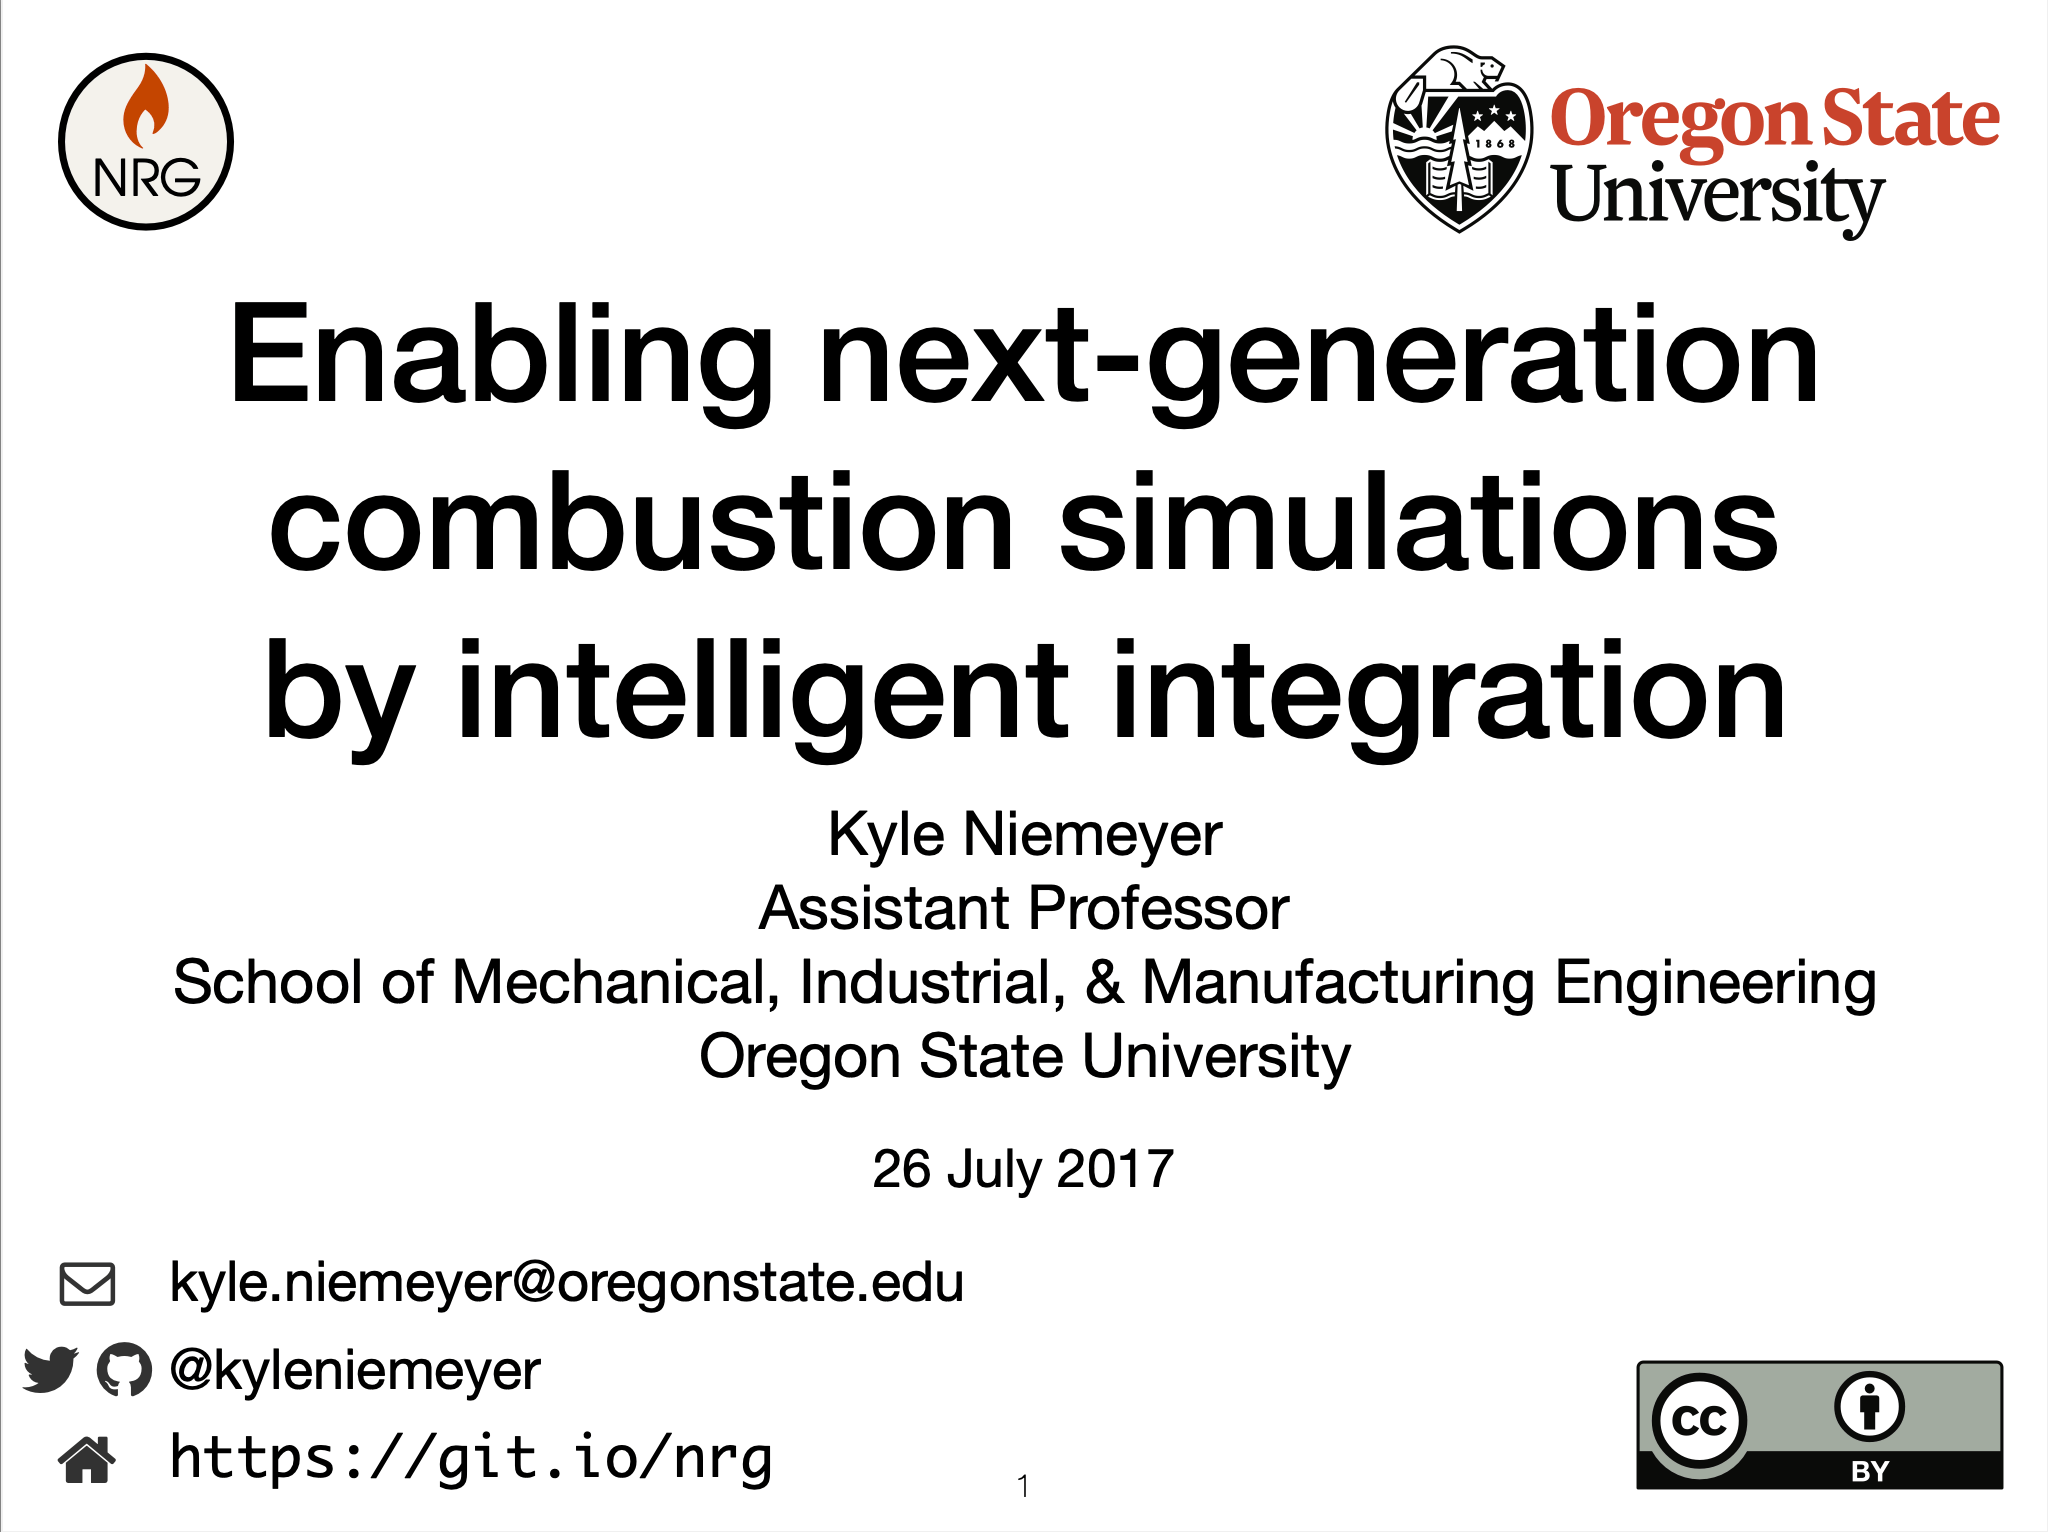 Title slide, that says 'Enabling next-generation combustion simulations by intelligent integration'.